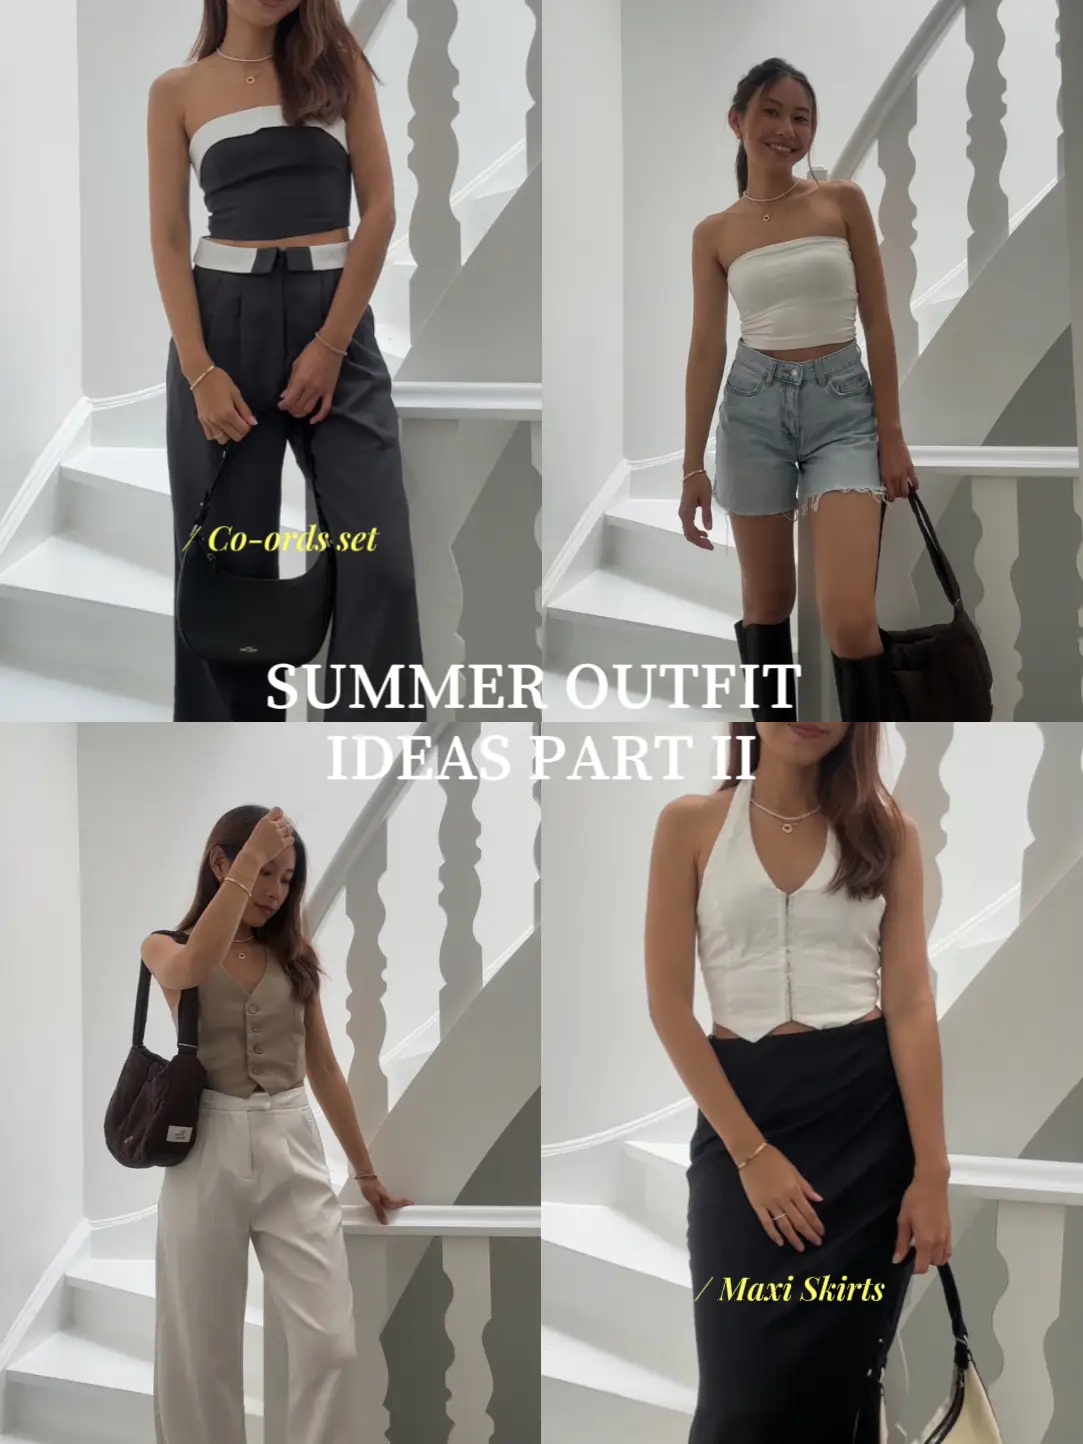 4 summer outfit ideas - Part II, Gallery posted by Amelia L